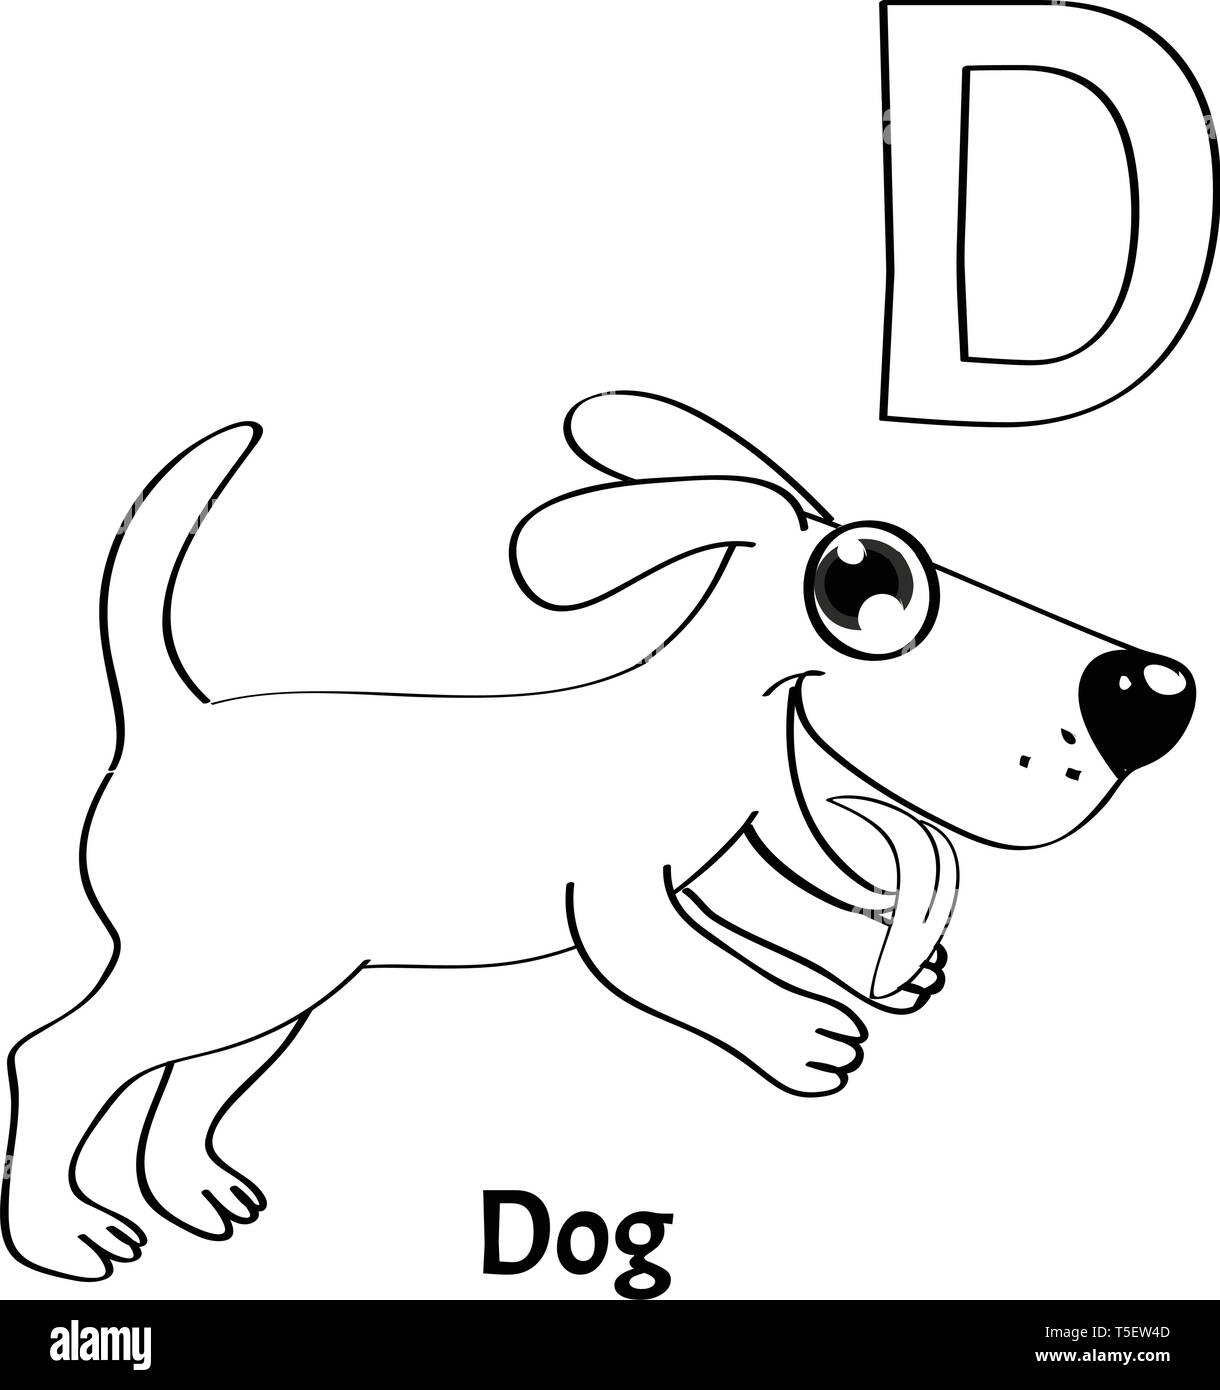 vector-alphabet-letter-d-coloring-page-dog-stock-vector-image-art